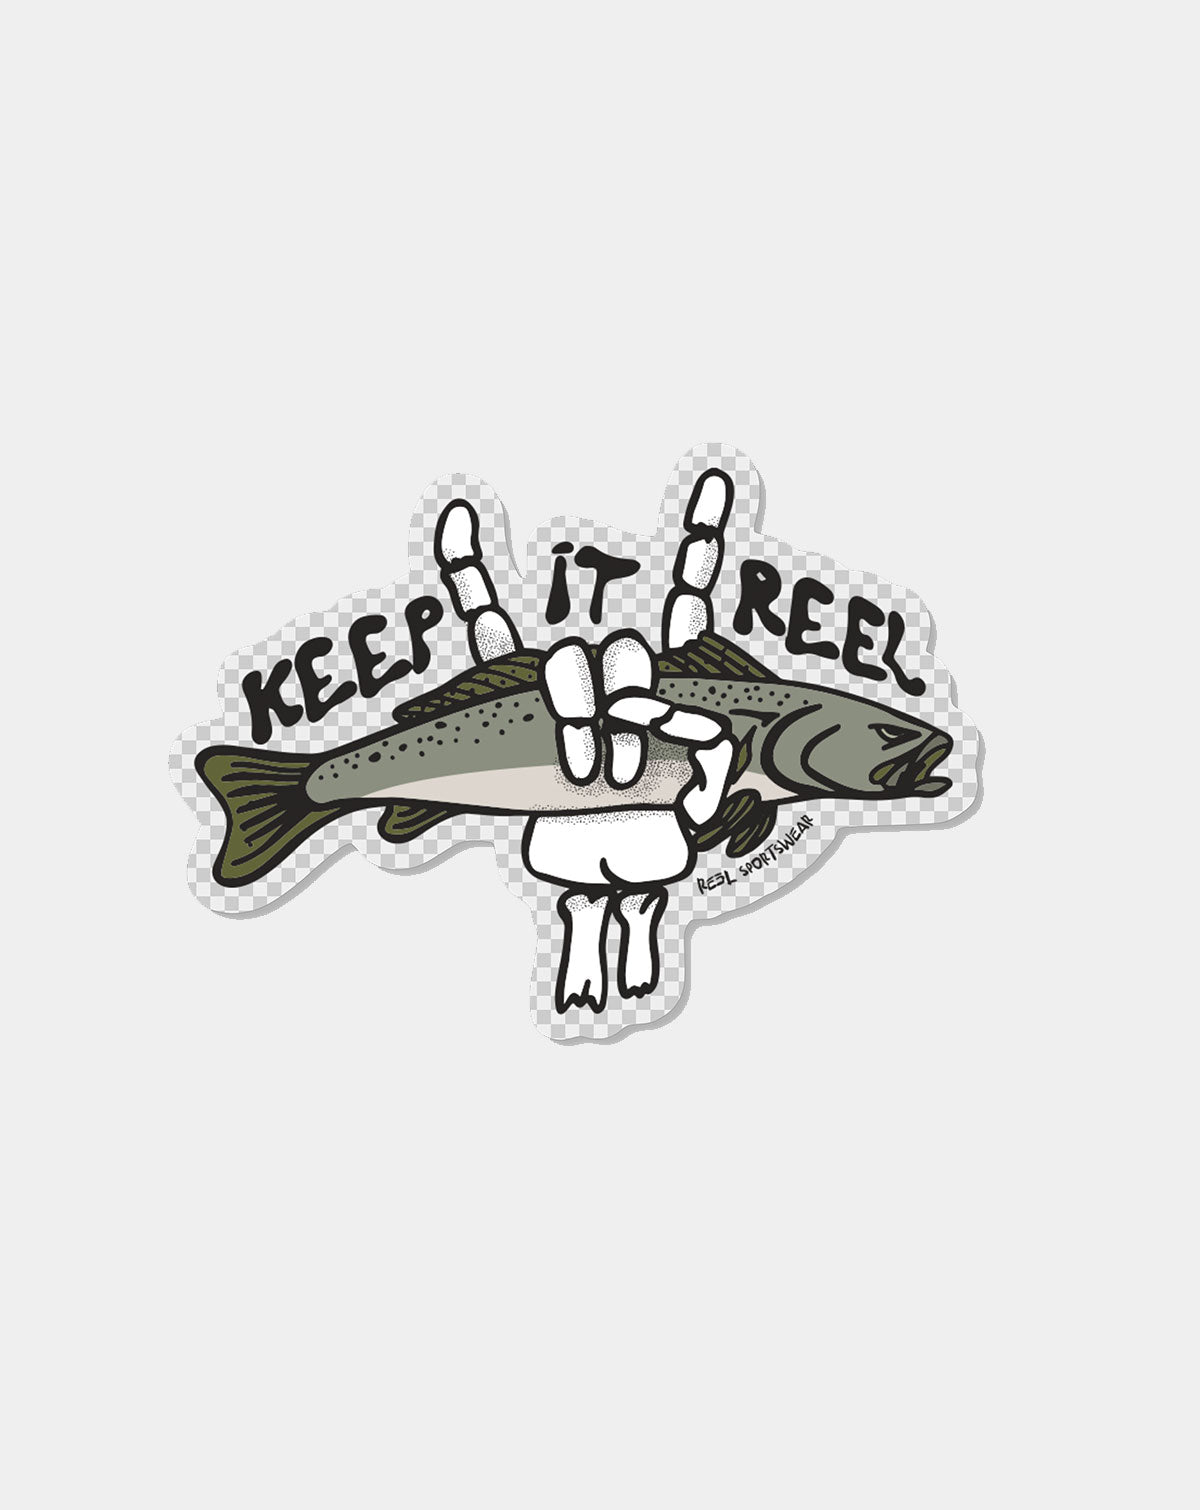 Keep it reel trout - Fishing Decal